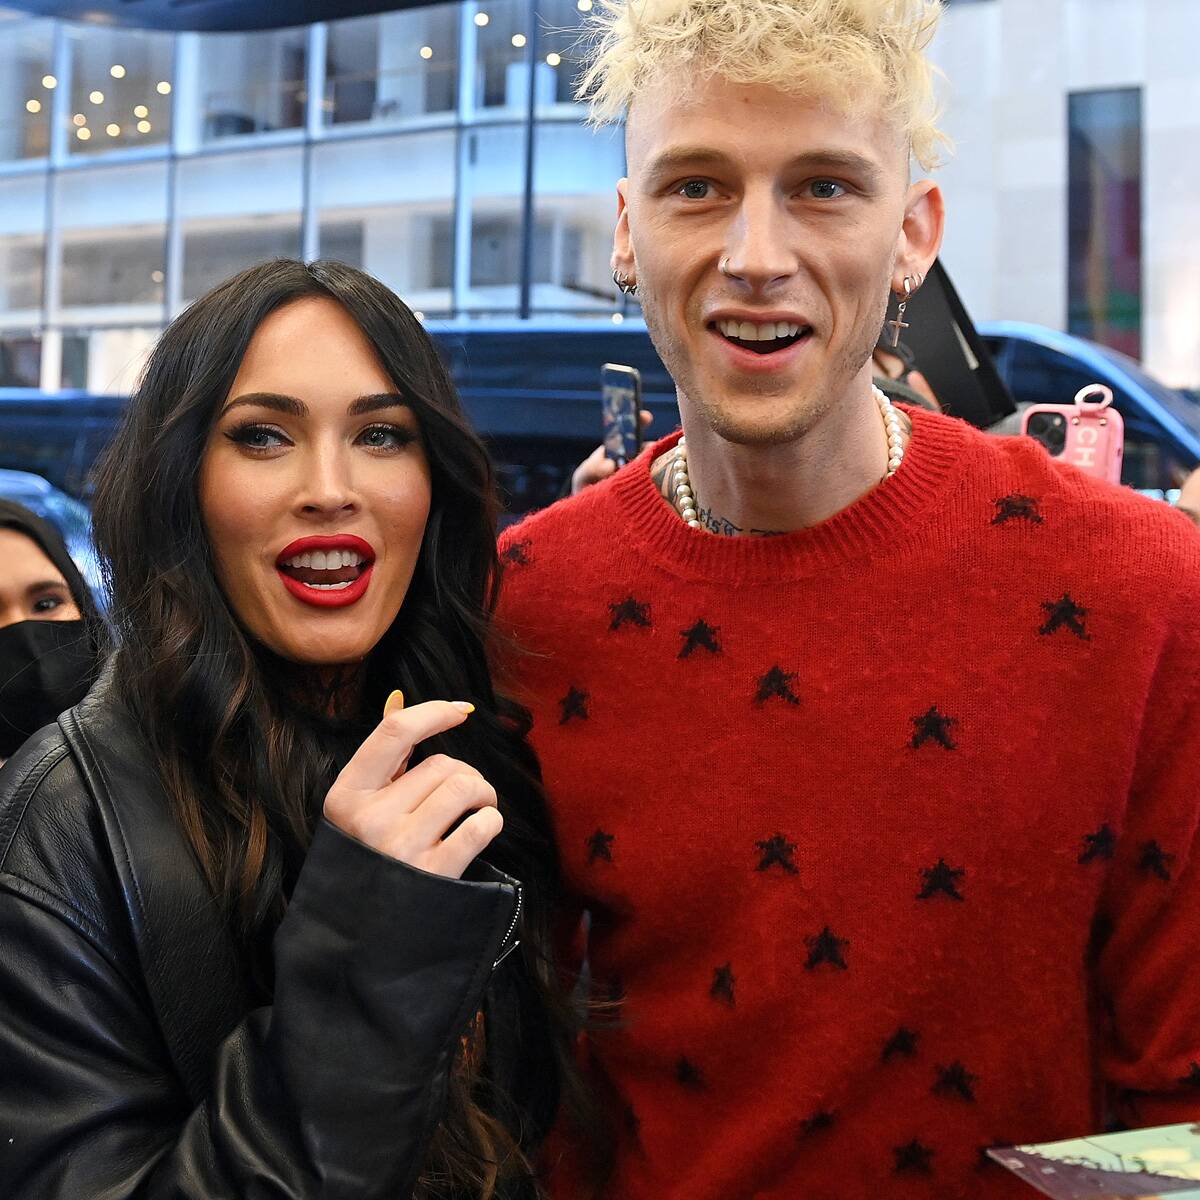 Machine Gun Kelly Proves Chivalry Isn't Dead as He Carries Megan Fox Into Crowded Studio